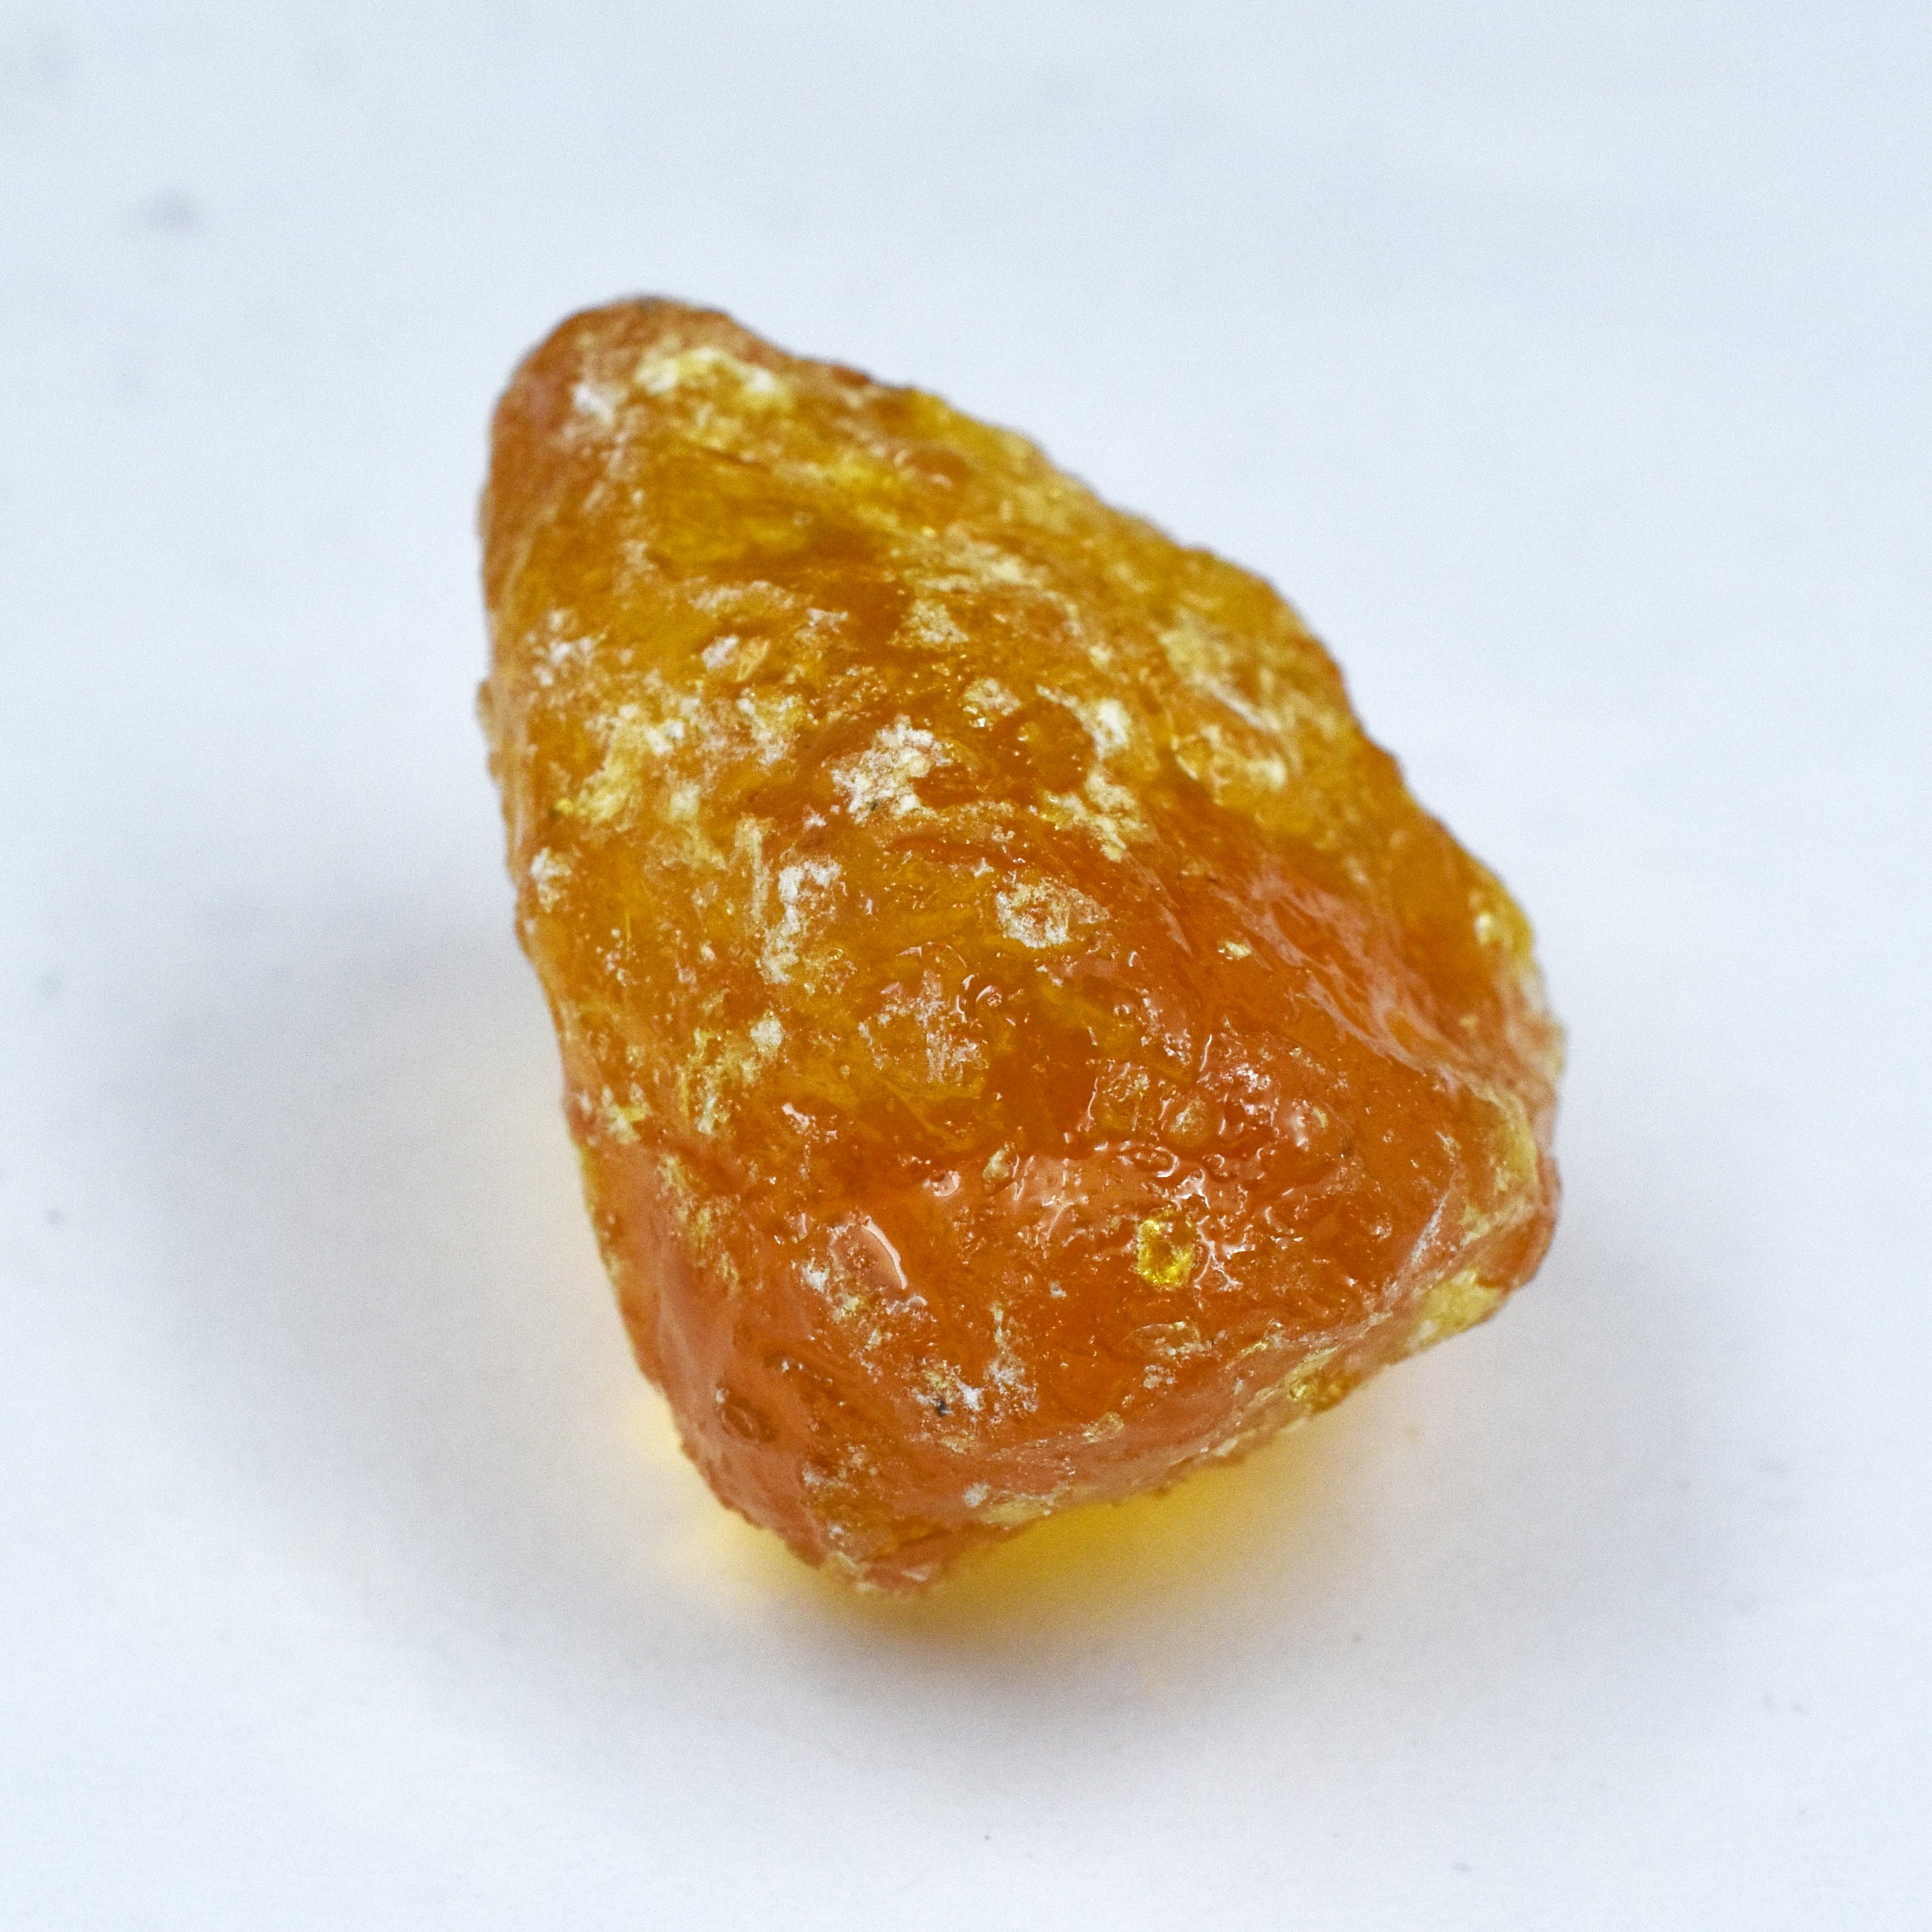 Certified Uncut Rough 31.52 Carat Natural Baltic Amber Yellow Rough Earth Mined Certified Loose Gemstone Madagascar Huge  Size Amber Rough For Jewelry Making